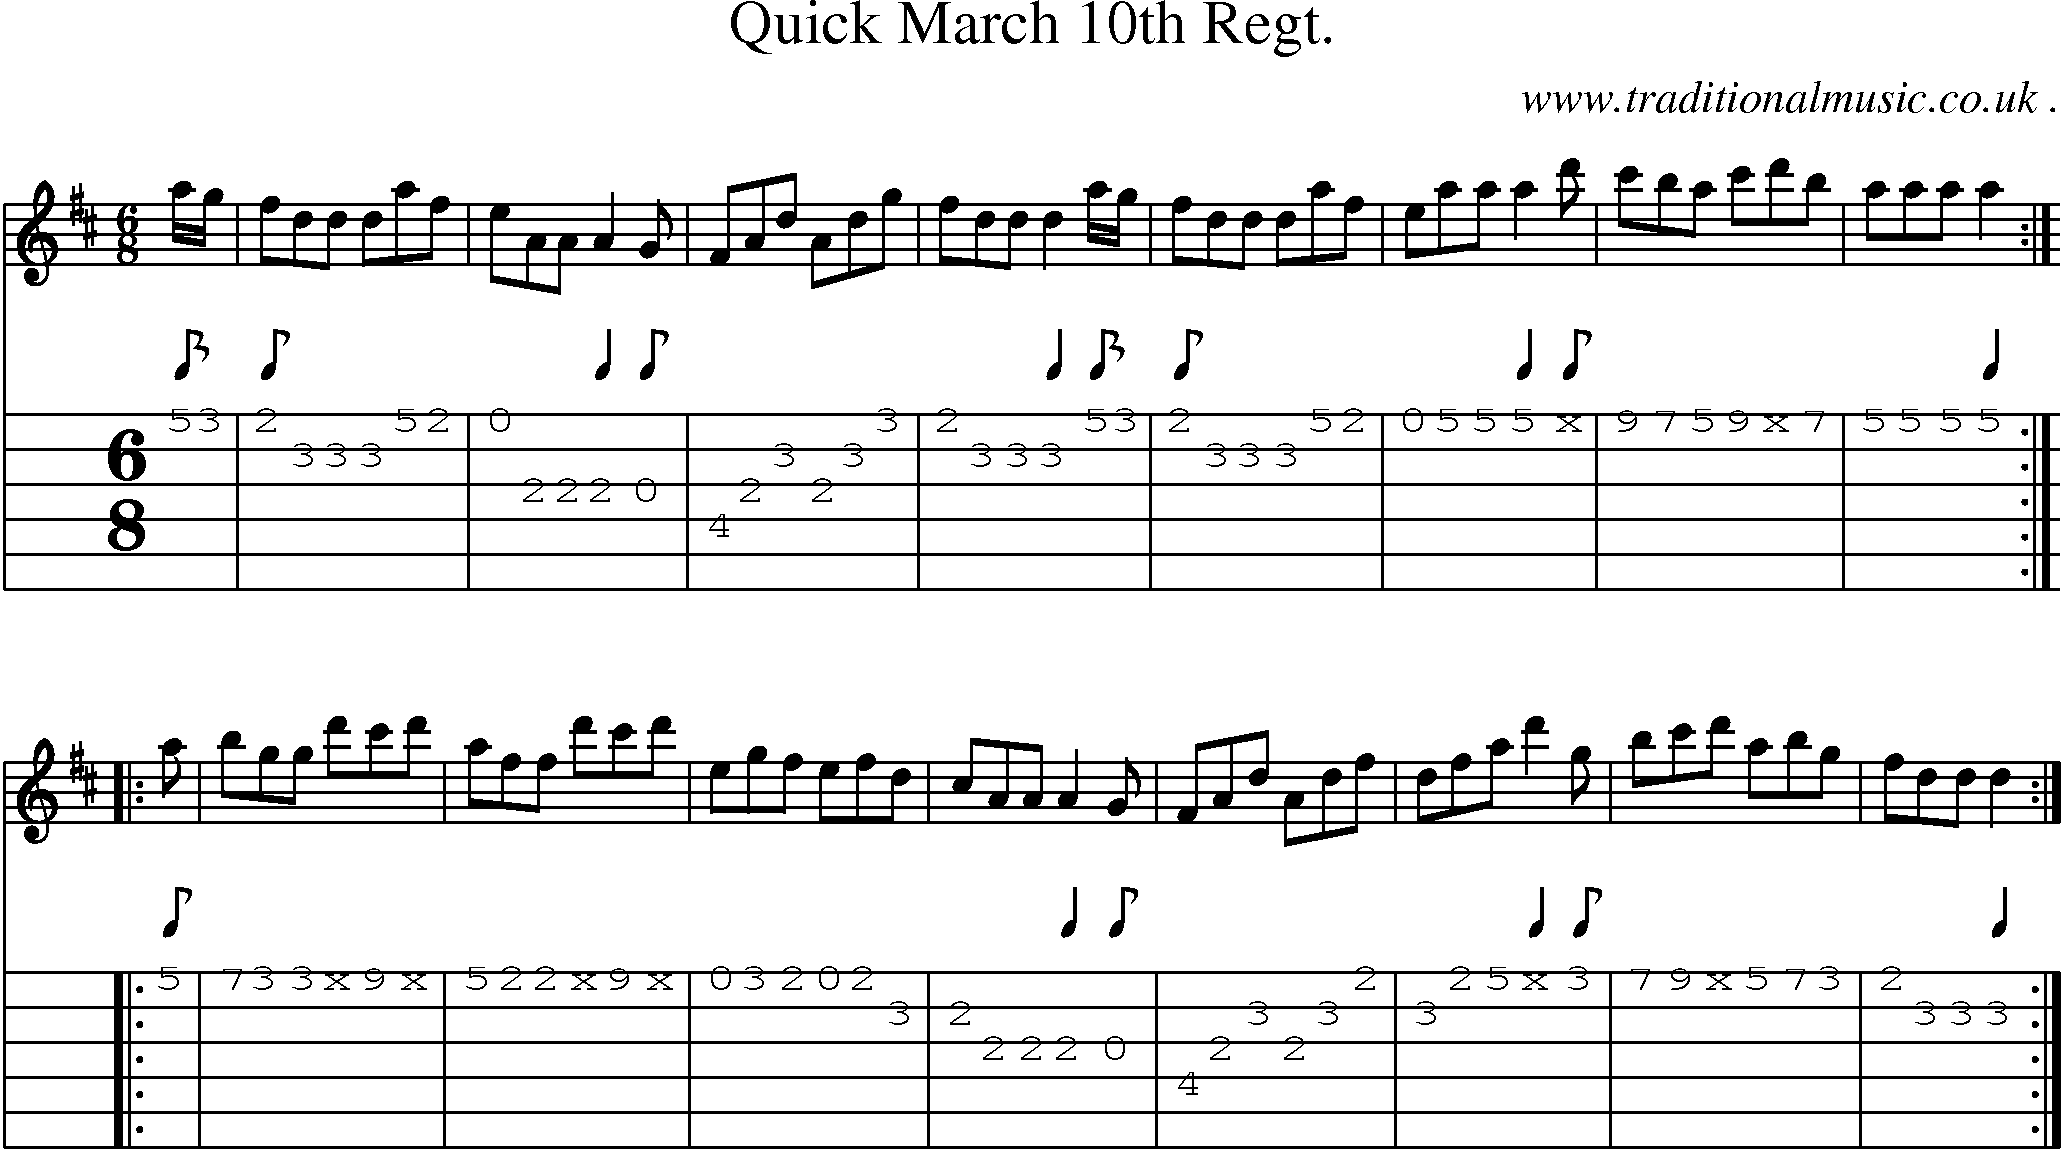 Sheet-Music and Guitar Tabs for Quick March 10th Regt